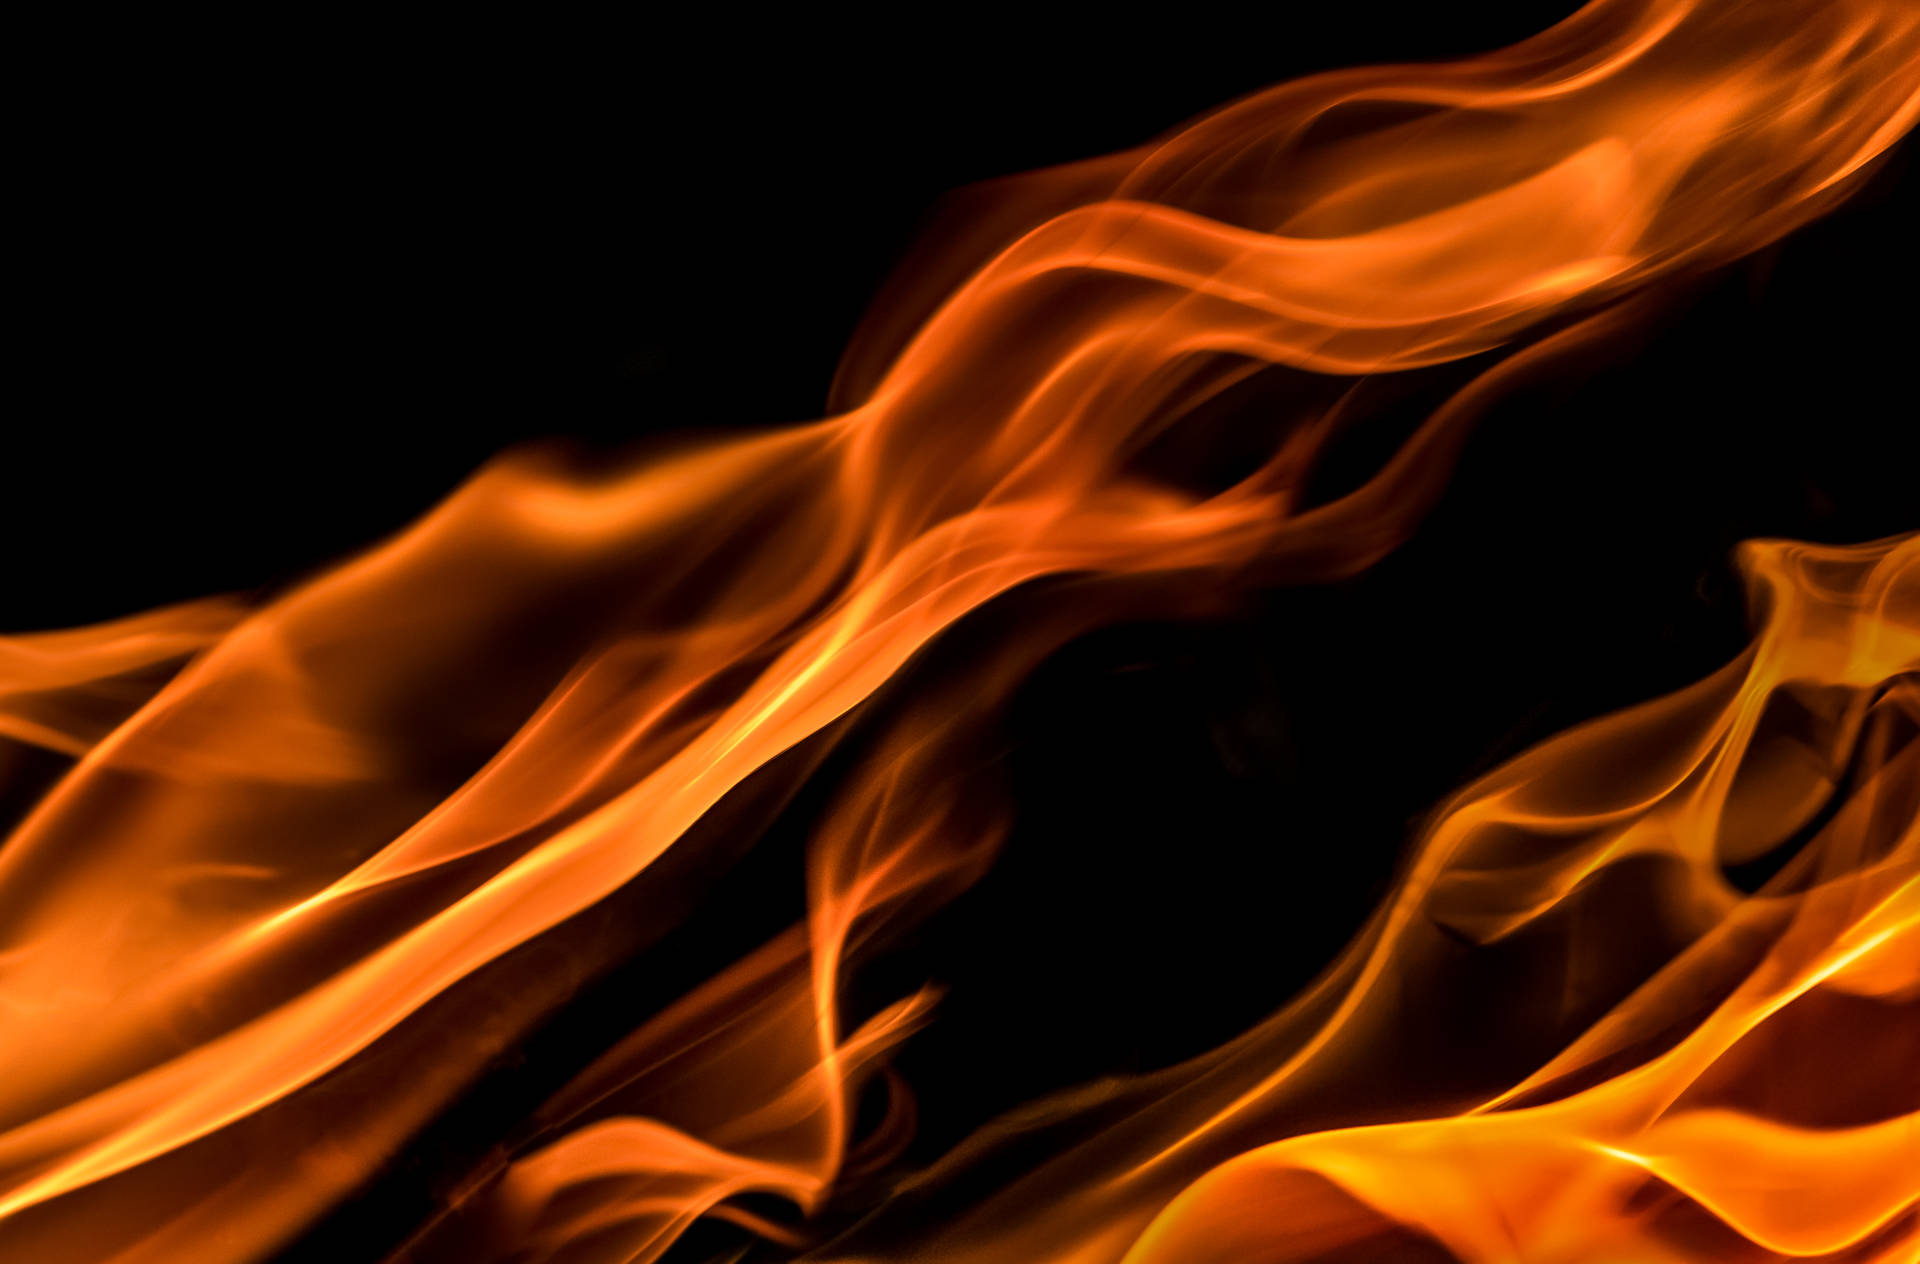 Fire 3488X2297 Wallpaper and Background Image